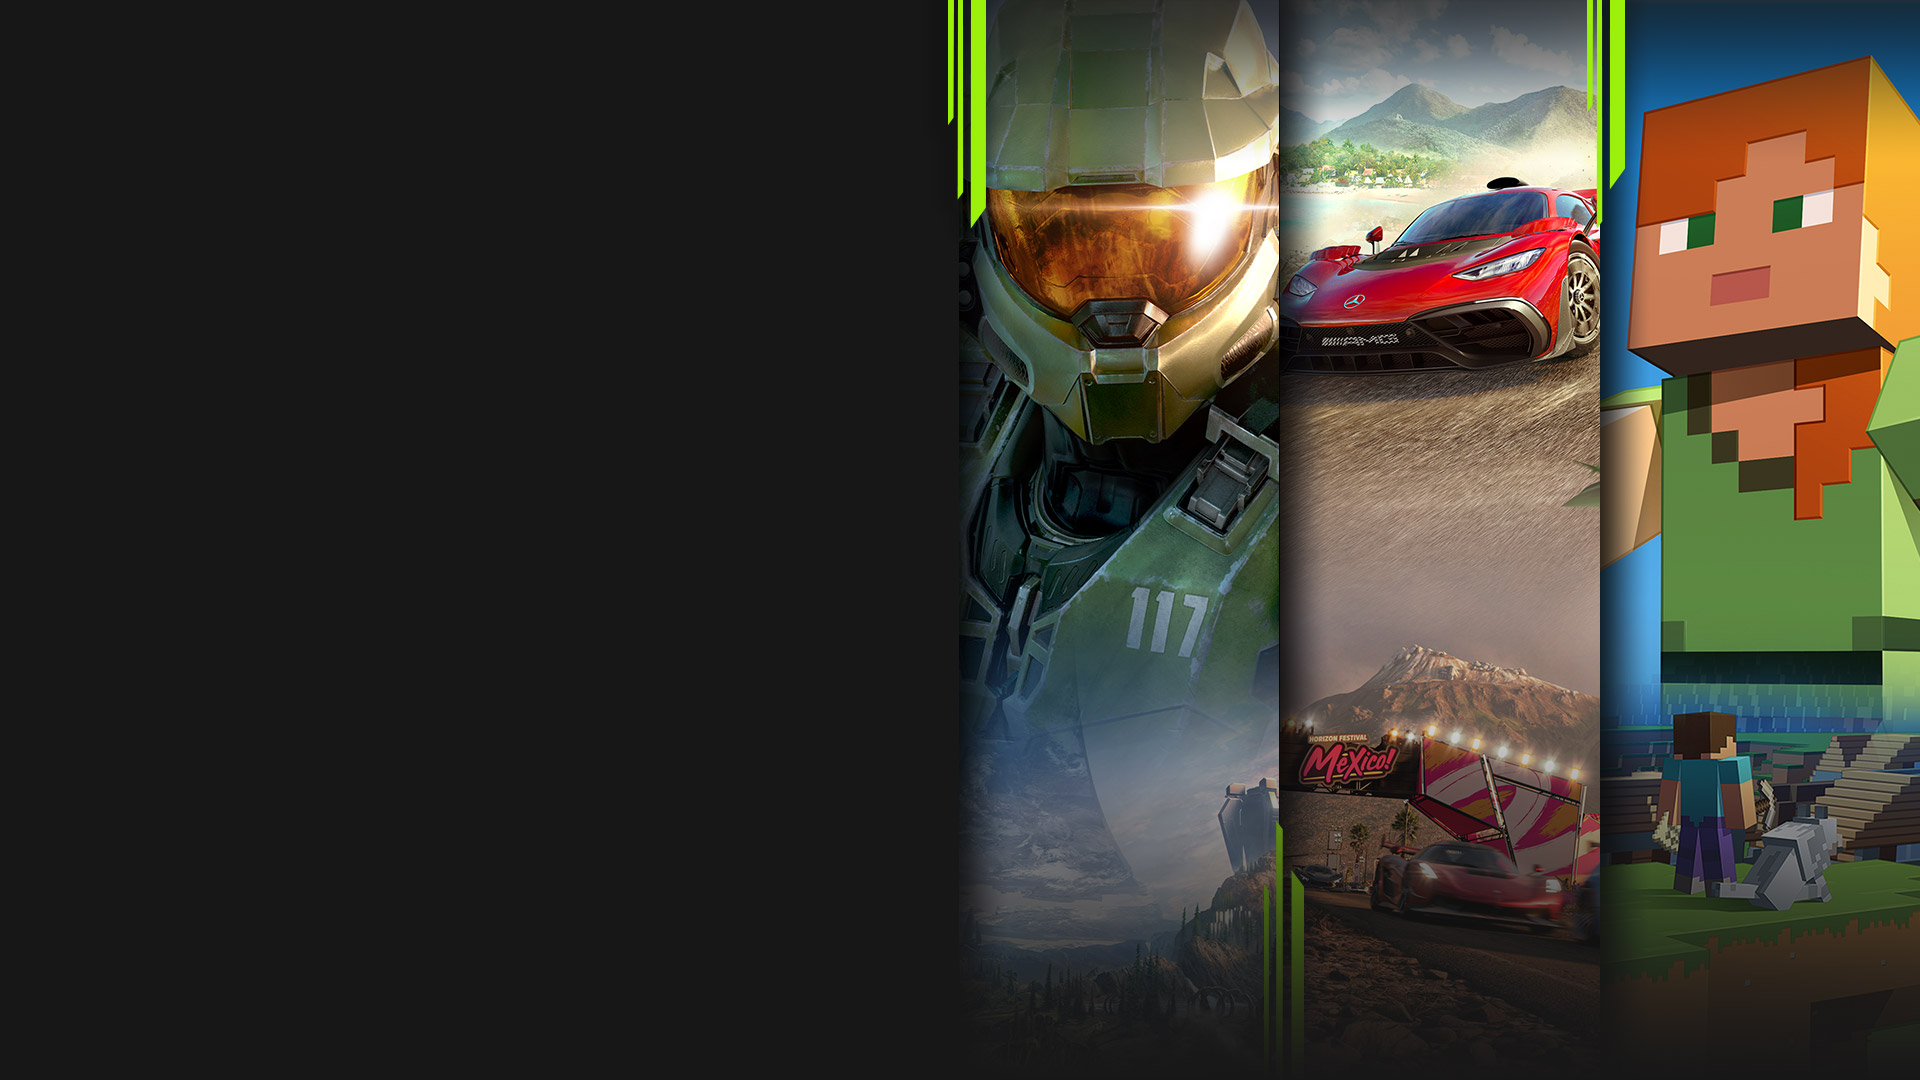 Game art from multiple games available with PC Game Pass including Halo Infinite, Forza Horizon 5, Minecraft, and Age of Empires IV.